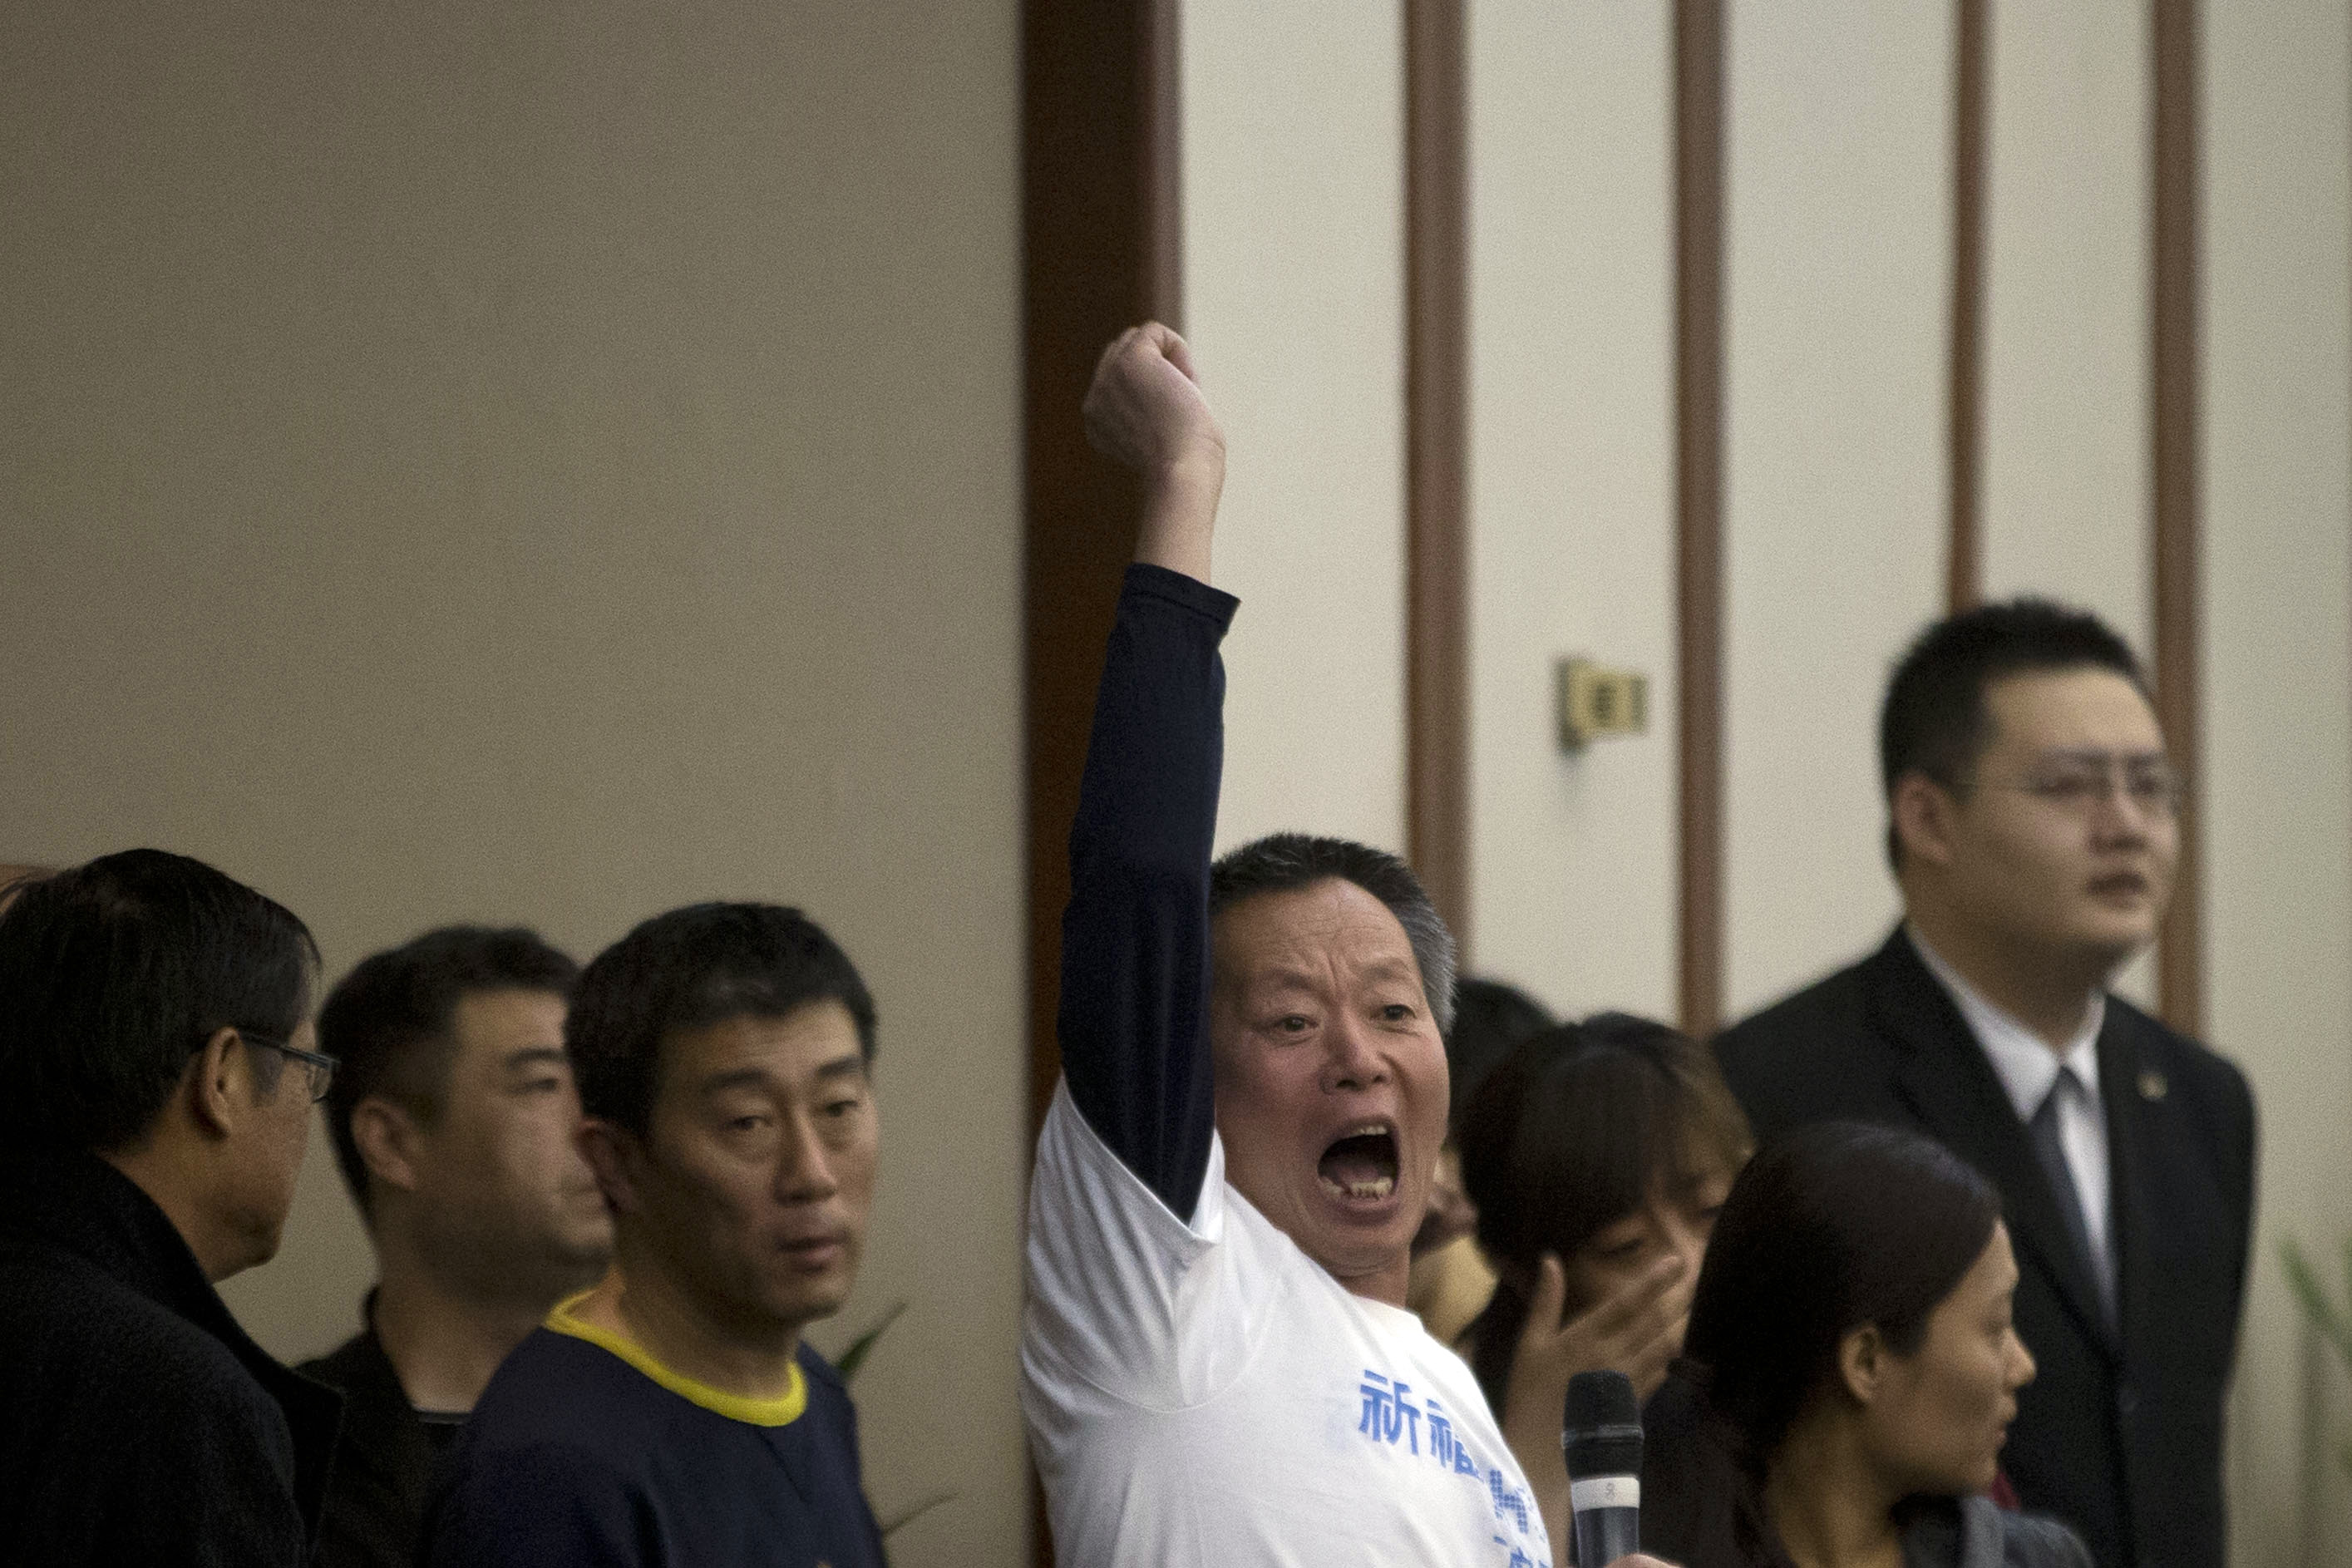 A relative of Chinese passengers aboard the missing Malaysia Airlines, flight MH370, protests after Malaysian government representatives leave after a briefing in Beijing on Saturday. Photo: AP